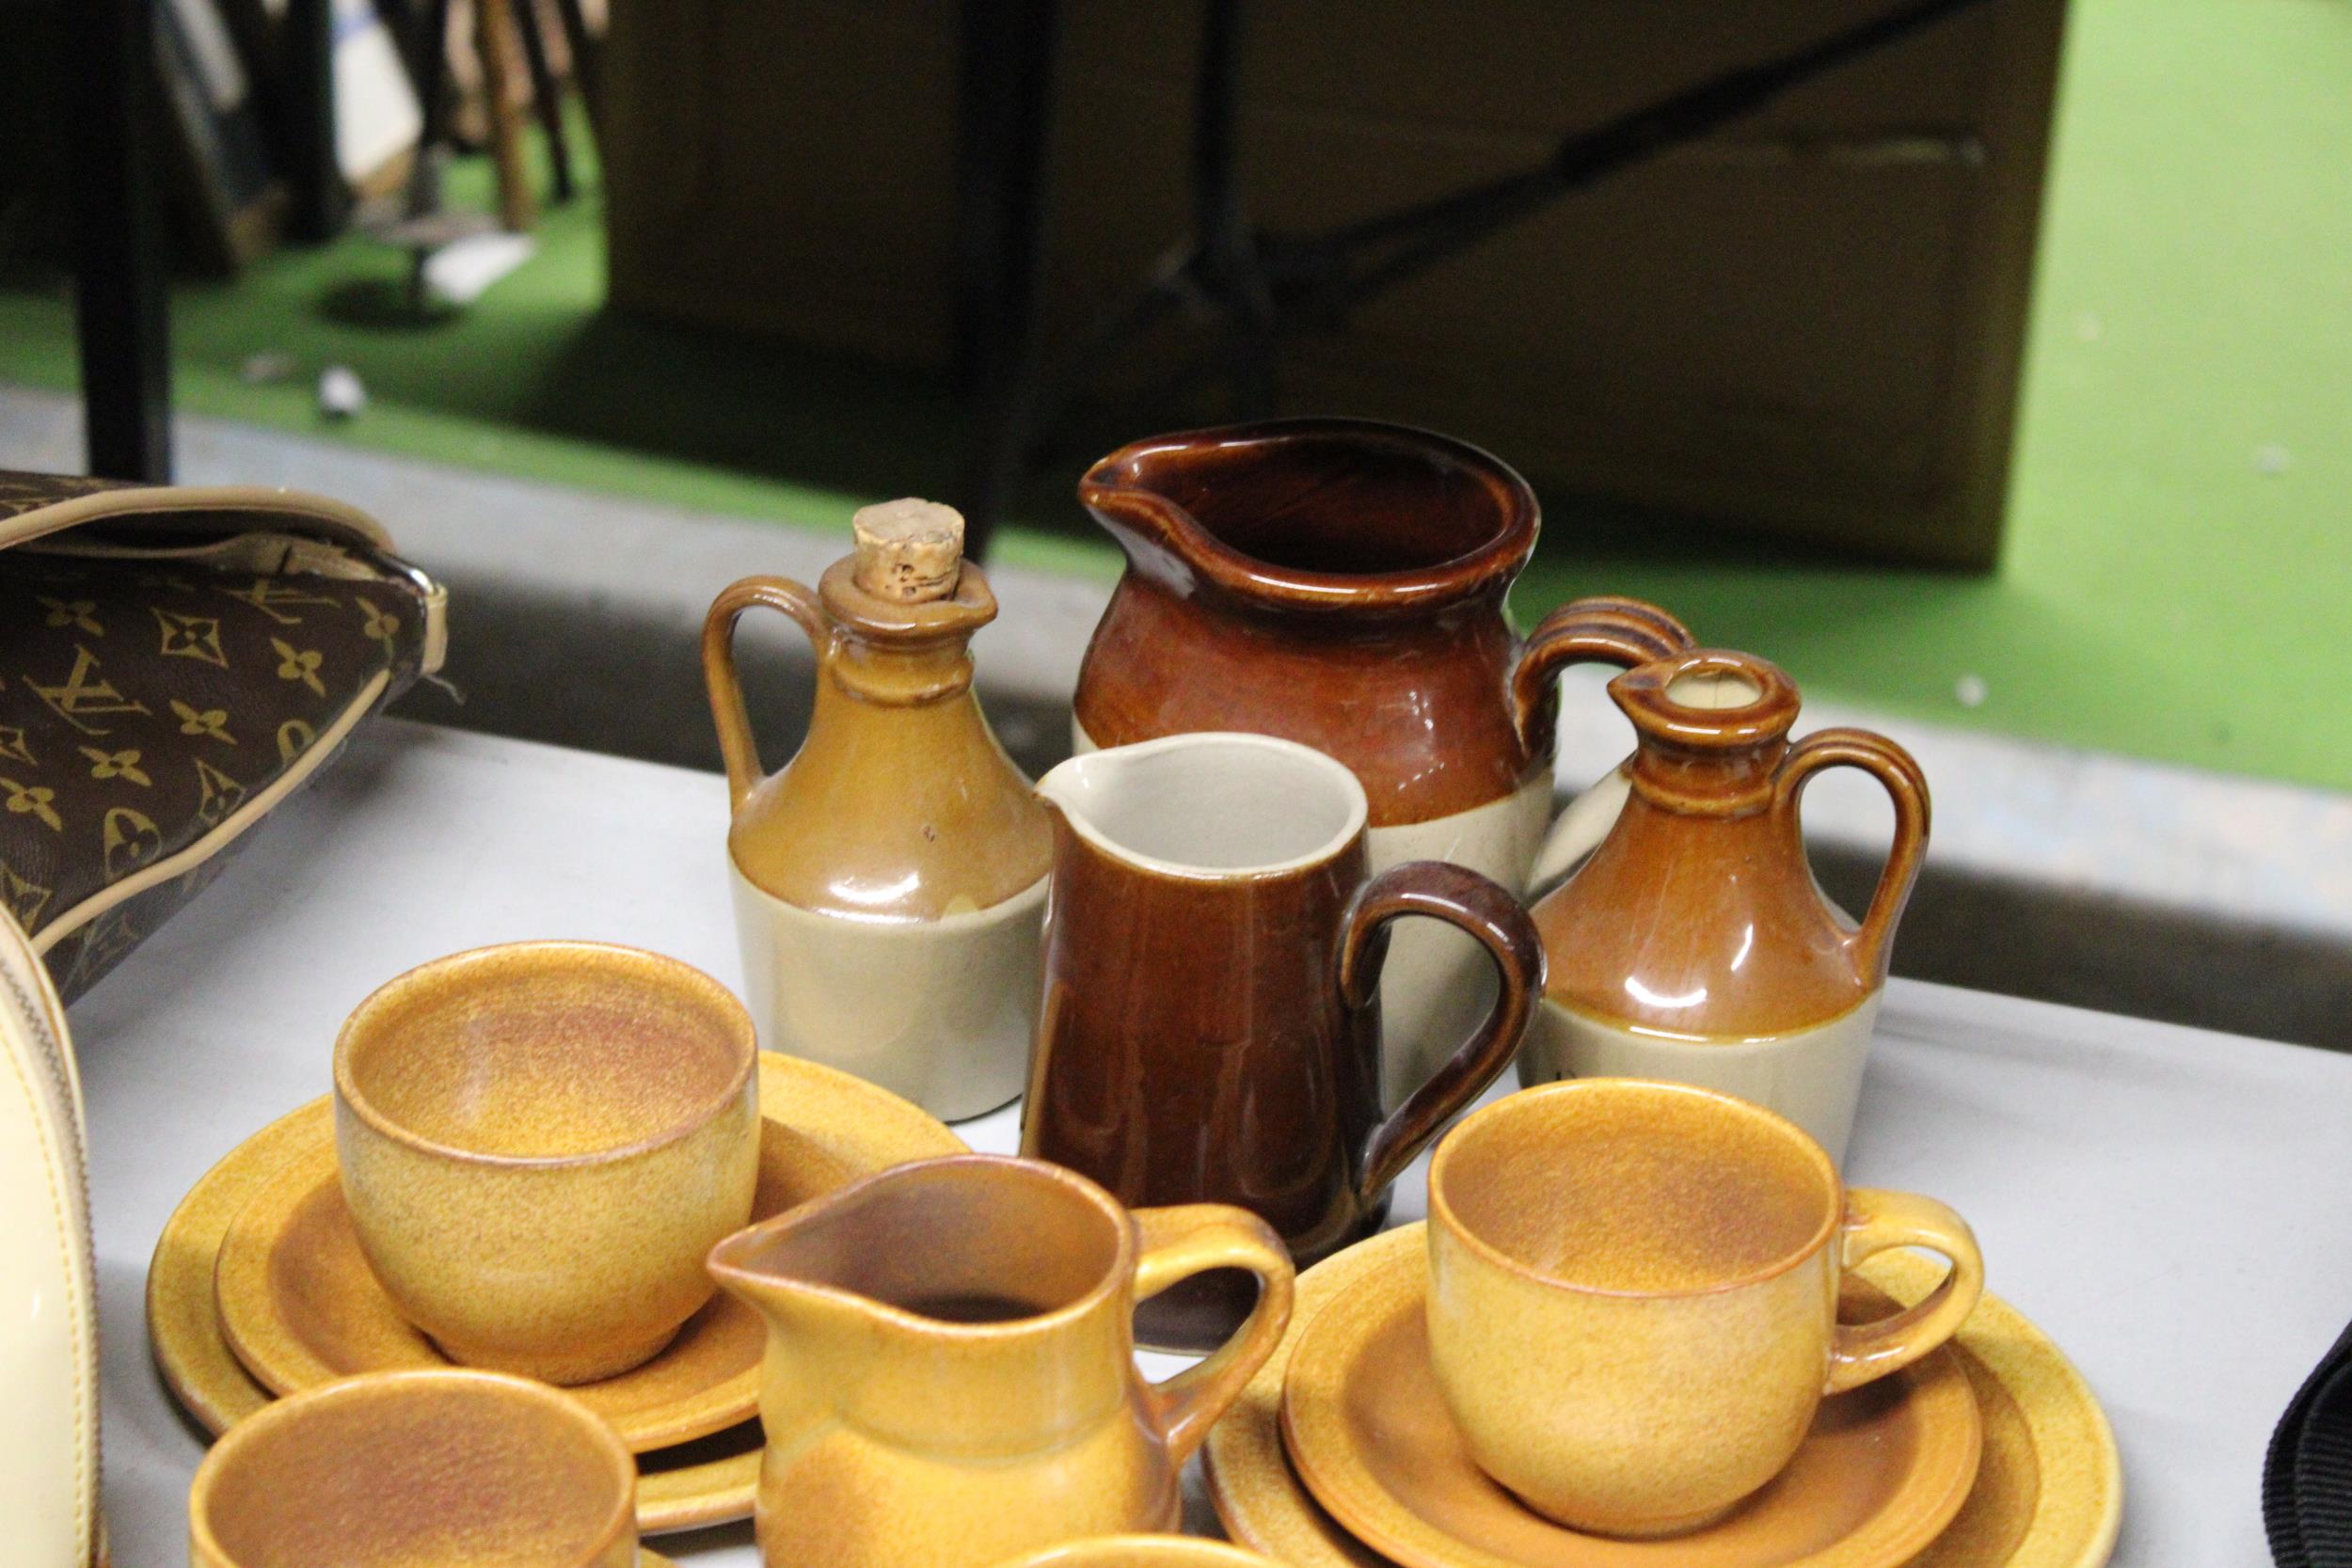 A STONEWARE COFFEE SET TO INCLUDE A CREAM JUG, SUGAR BOWL, CUPS, SAUCERS AND SIDE PLATES, PLUS JUGS, - Image 4 of 5